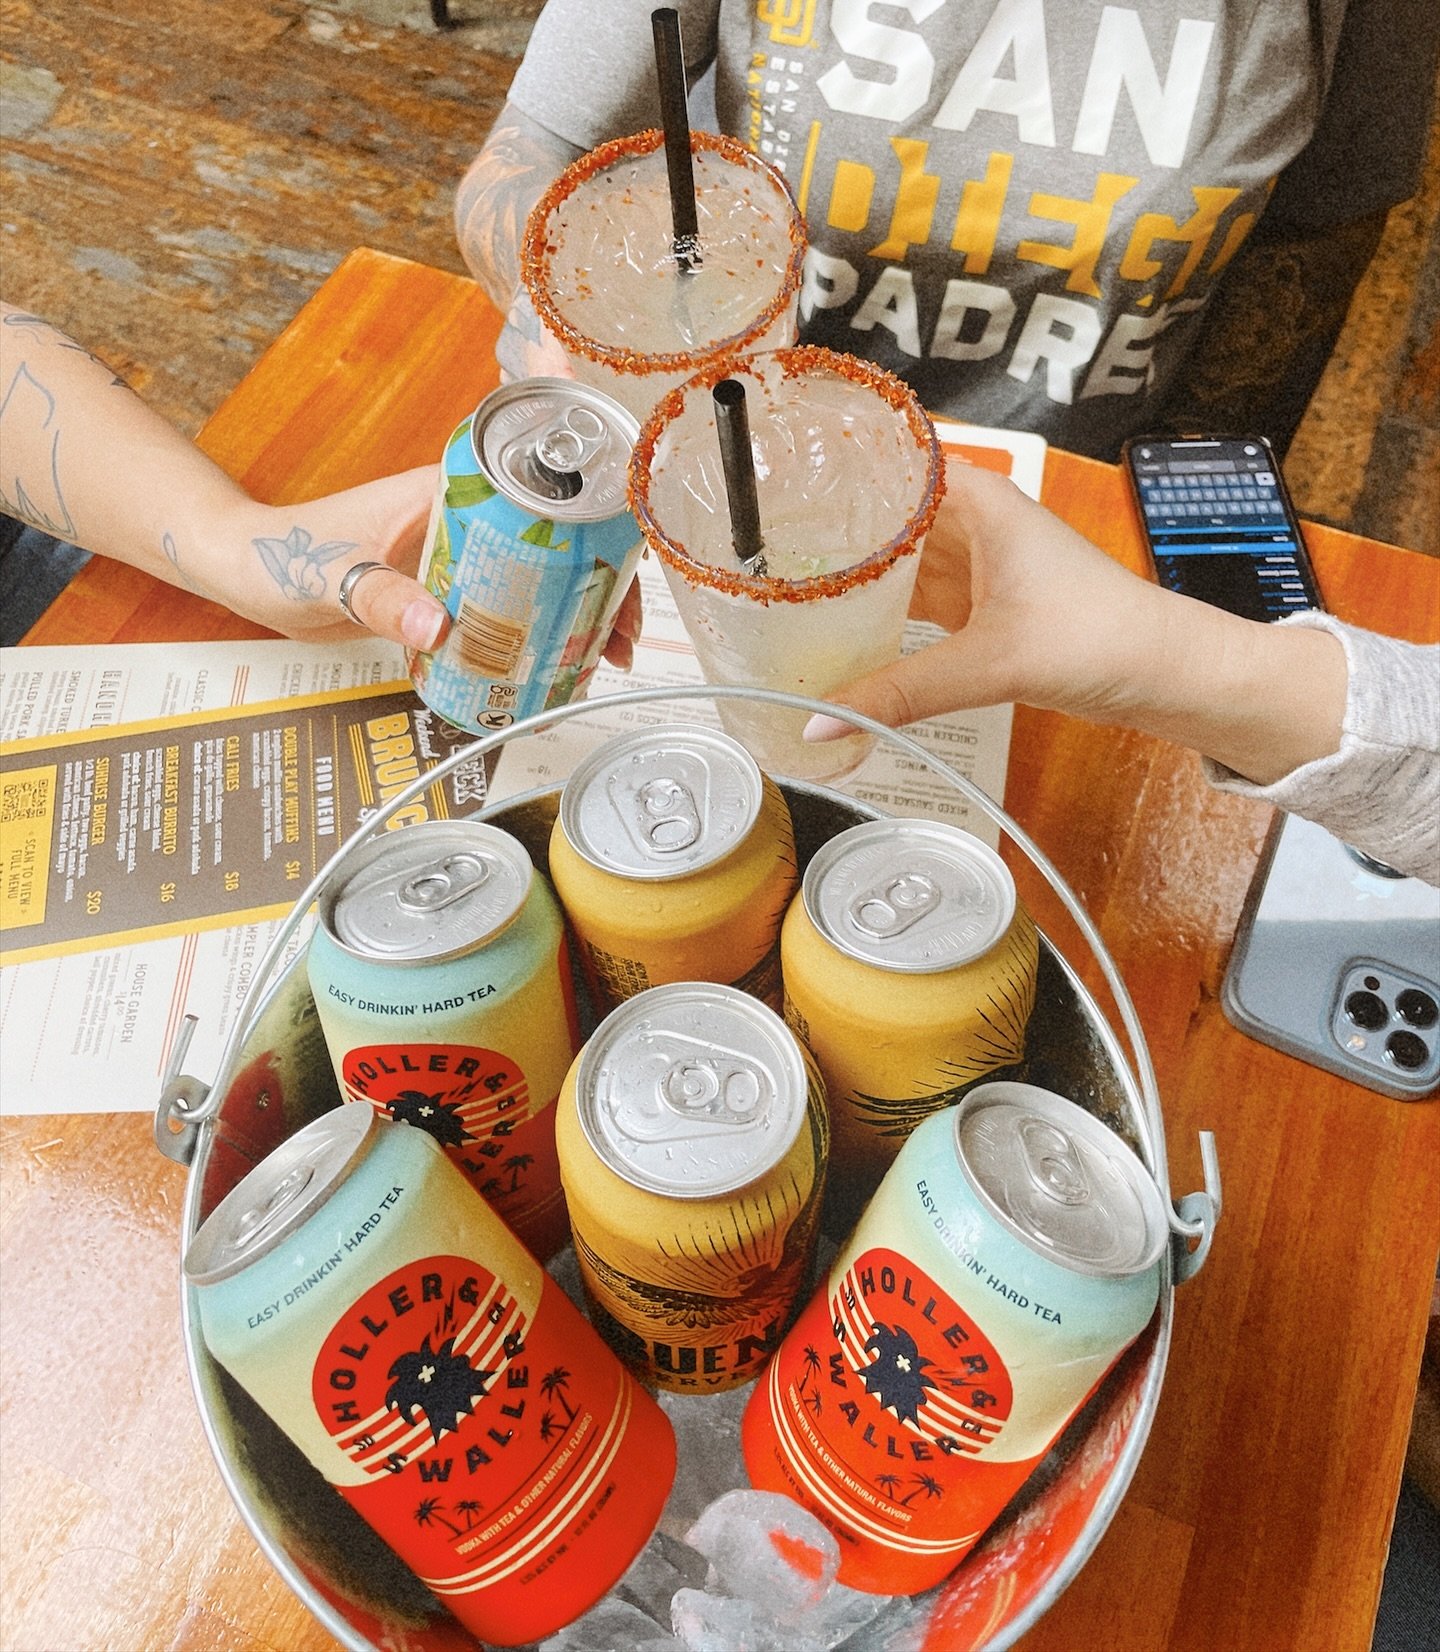 Cheers to PADRES days ahead. Stop by for the pregame!

6 CAN BUCKET SPECIALS 
$35 ✦ Buena Cerveza | Holler &amp; Swaller Hard Tea
$40 ✦ Coors Light | Miller Lite
$45 ✦ Juneshine | Topo Chico